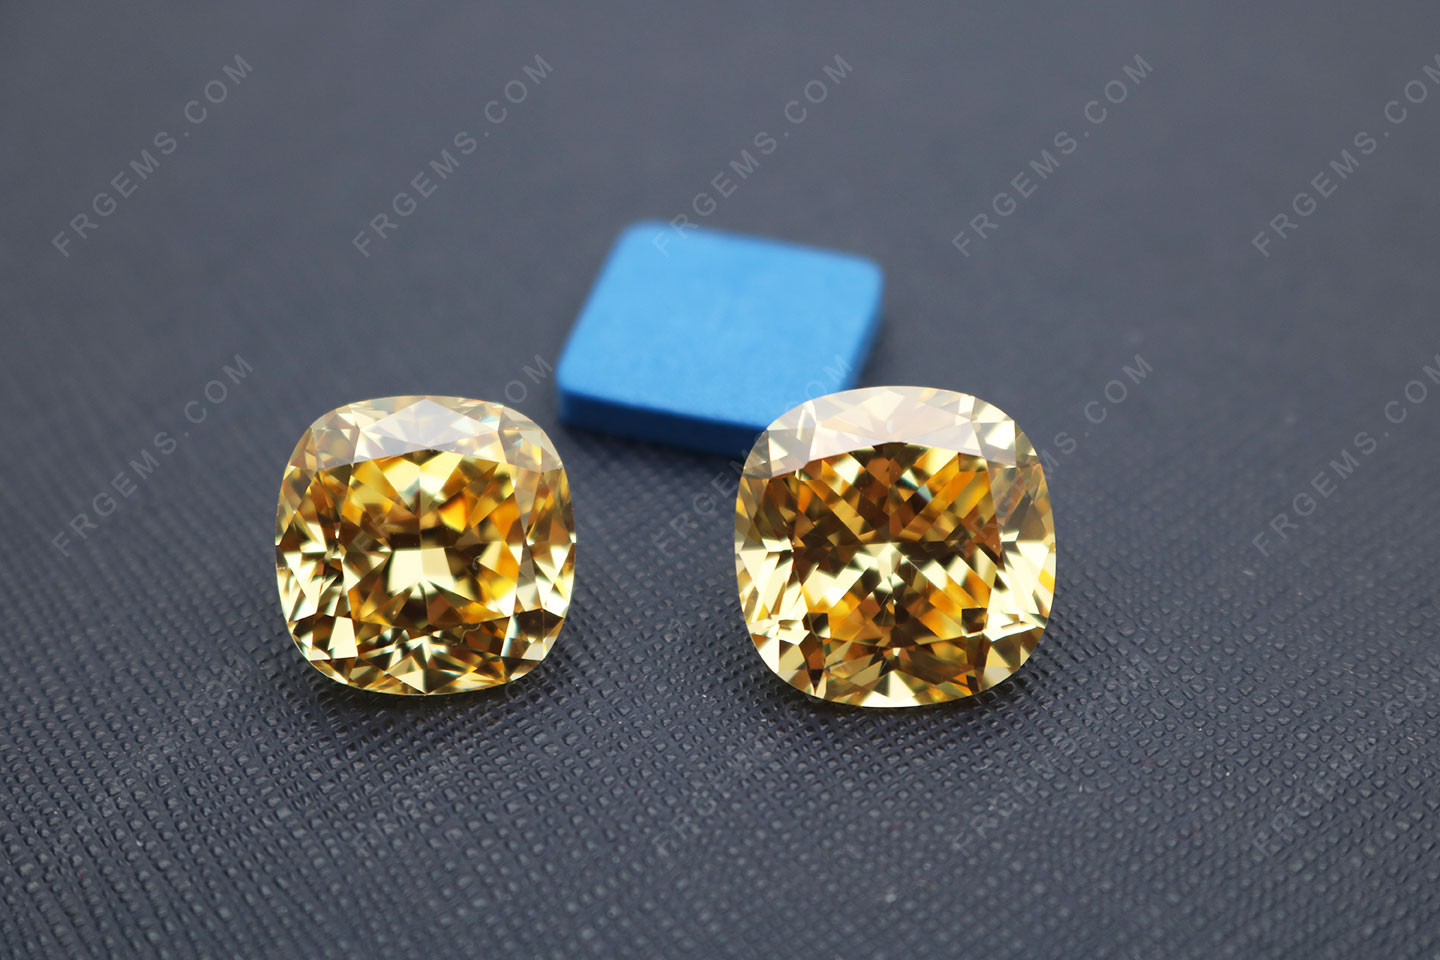 Cubic Zirconia Canary Yellow Cushion Faceted brilliant cut 5A Best top Quality 15x15mm gemstones